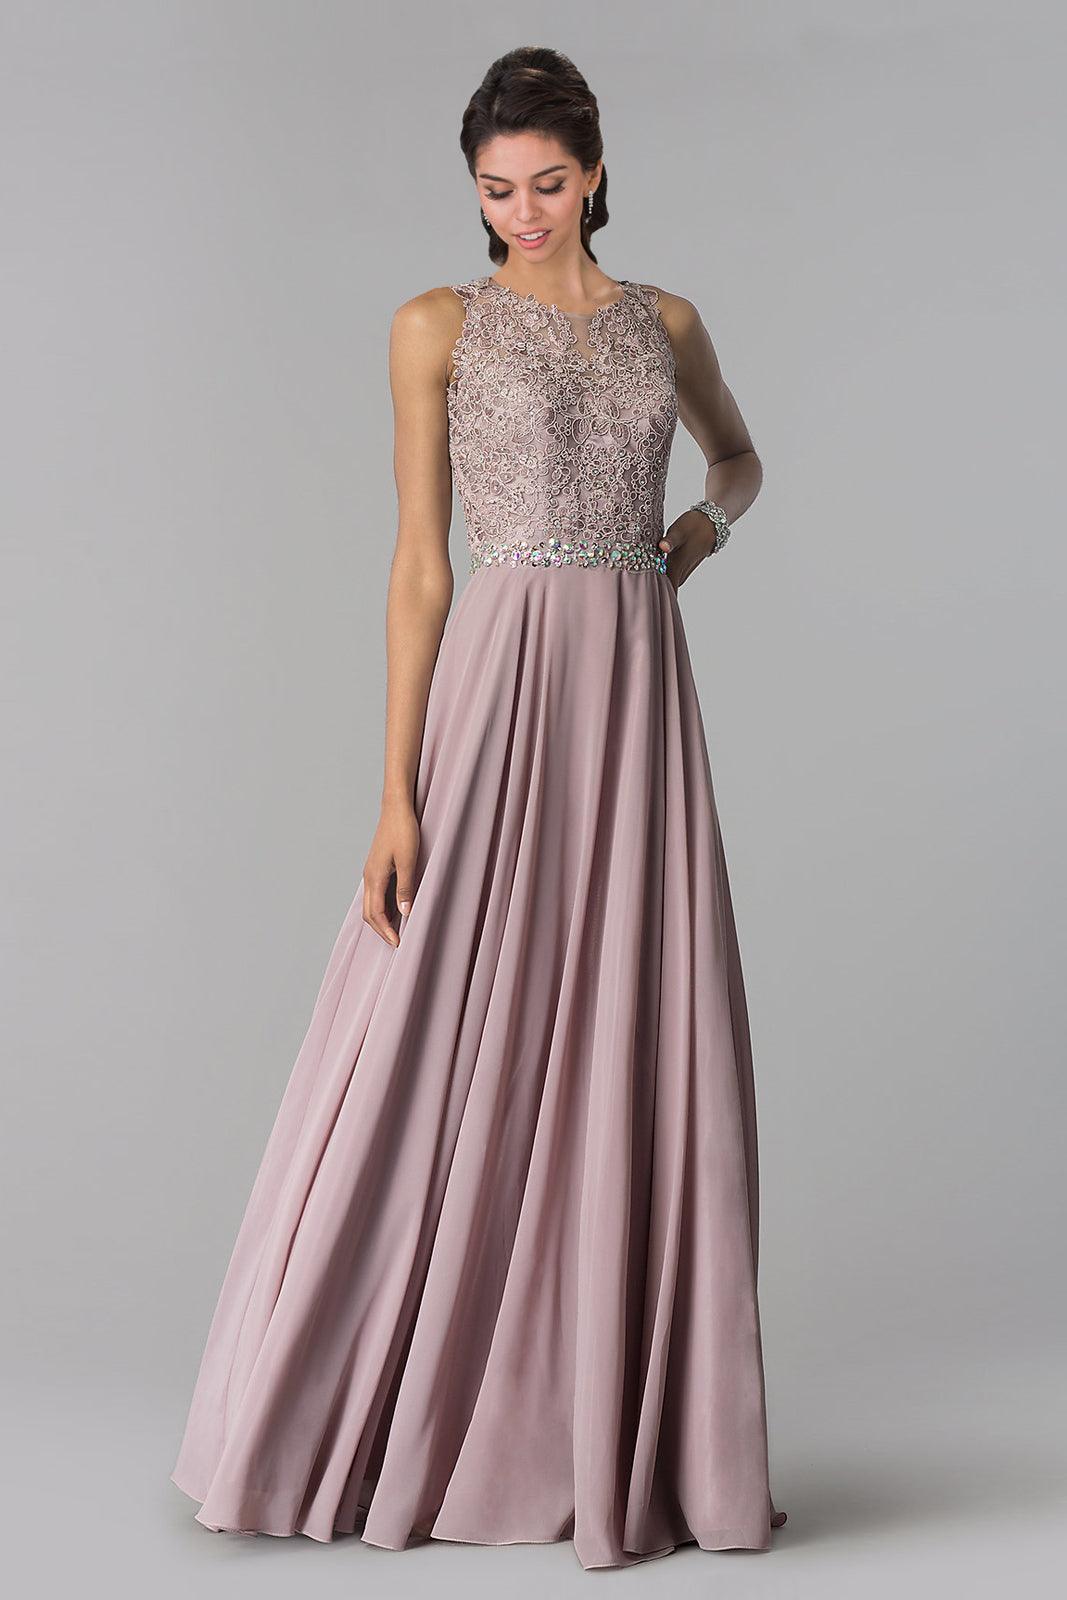 Long Bridesmaid Prom Dress Formal Sale - The Dress Outlet